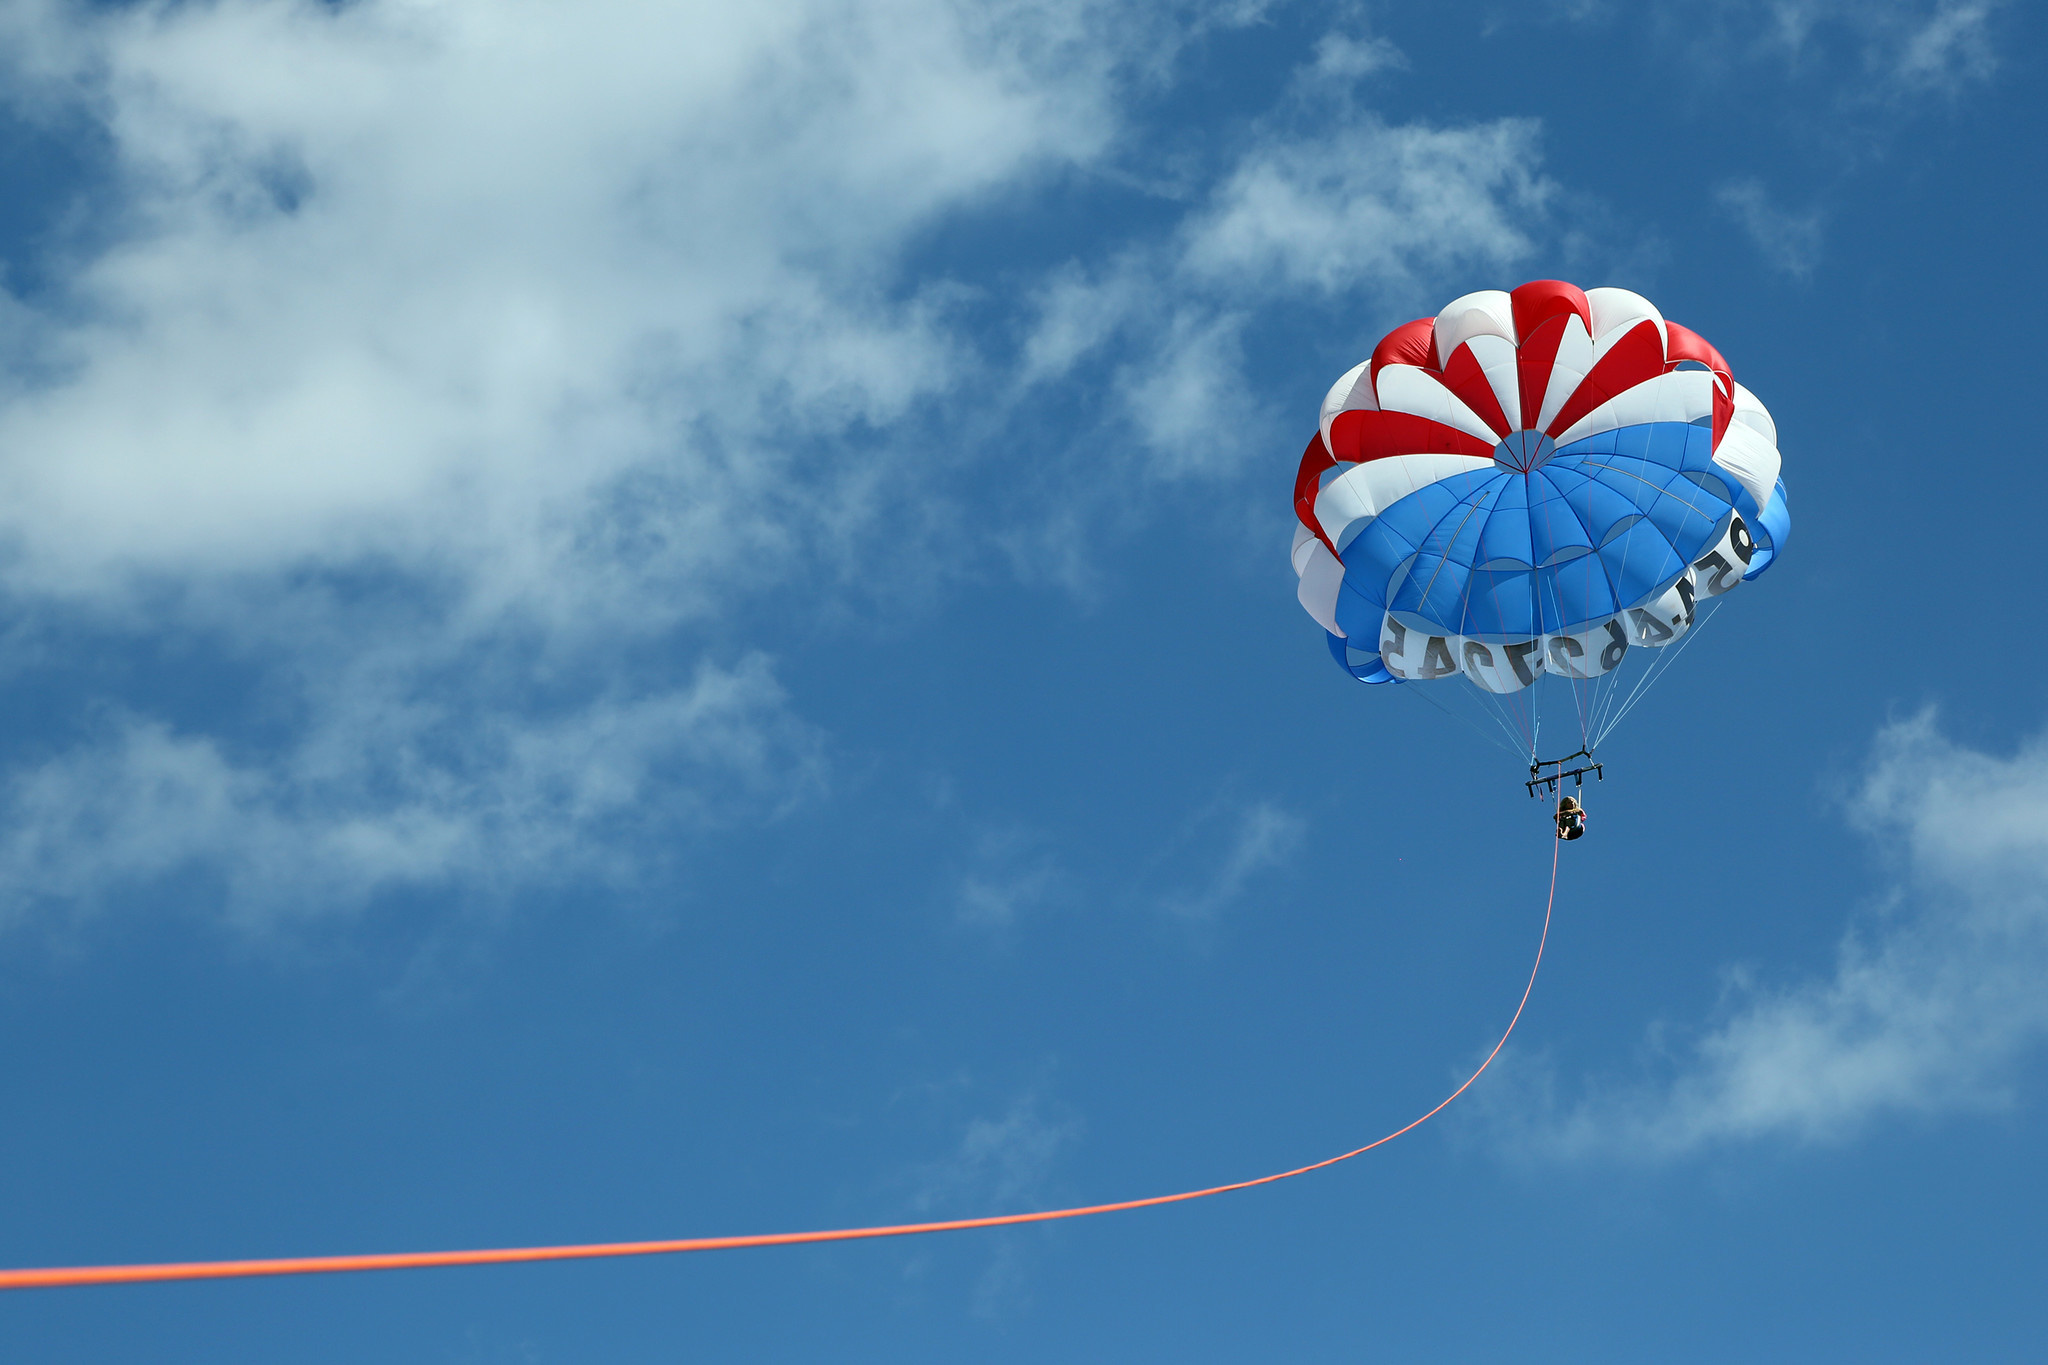 Parasailing: Safety, Solo flight, Challenging, Soaring like a bird, New law. 2050x1370 HD Wallpaper.